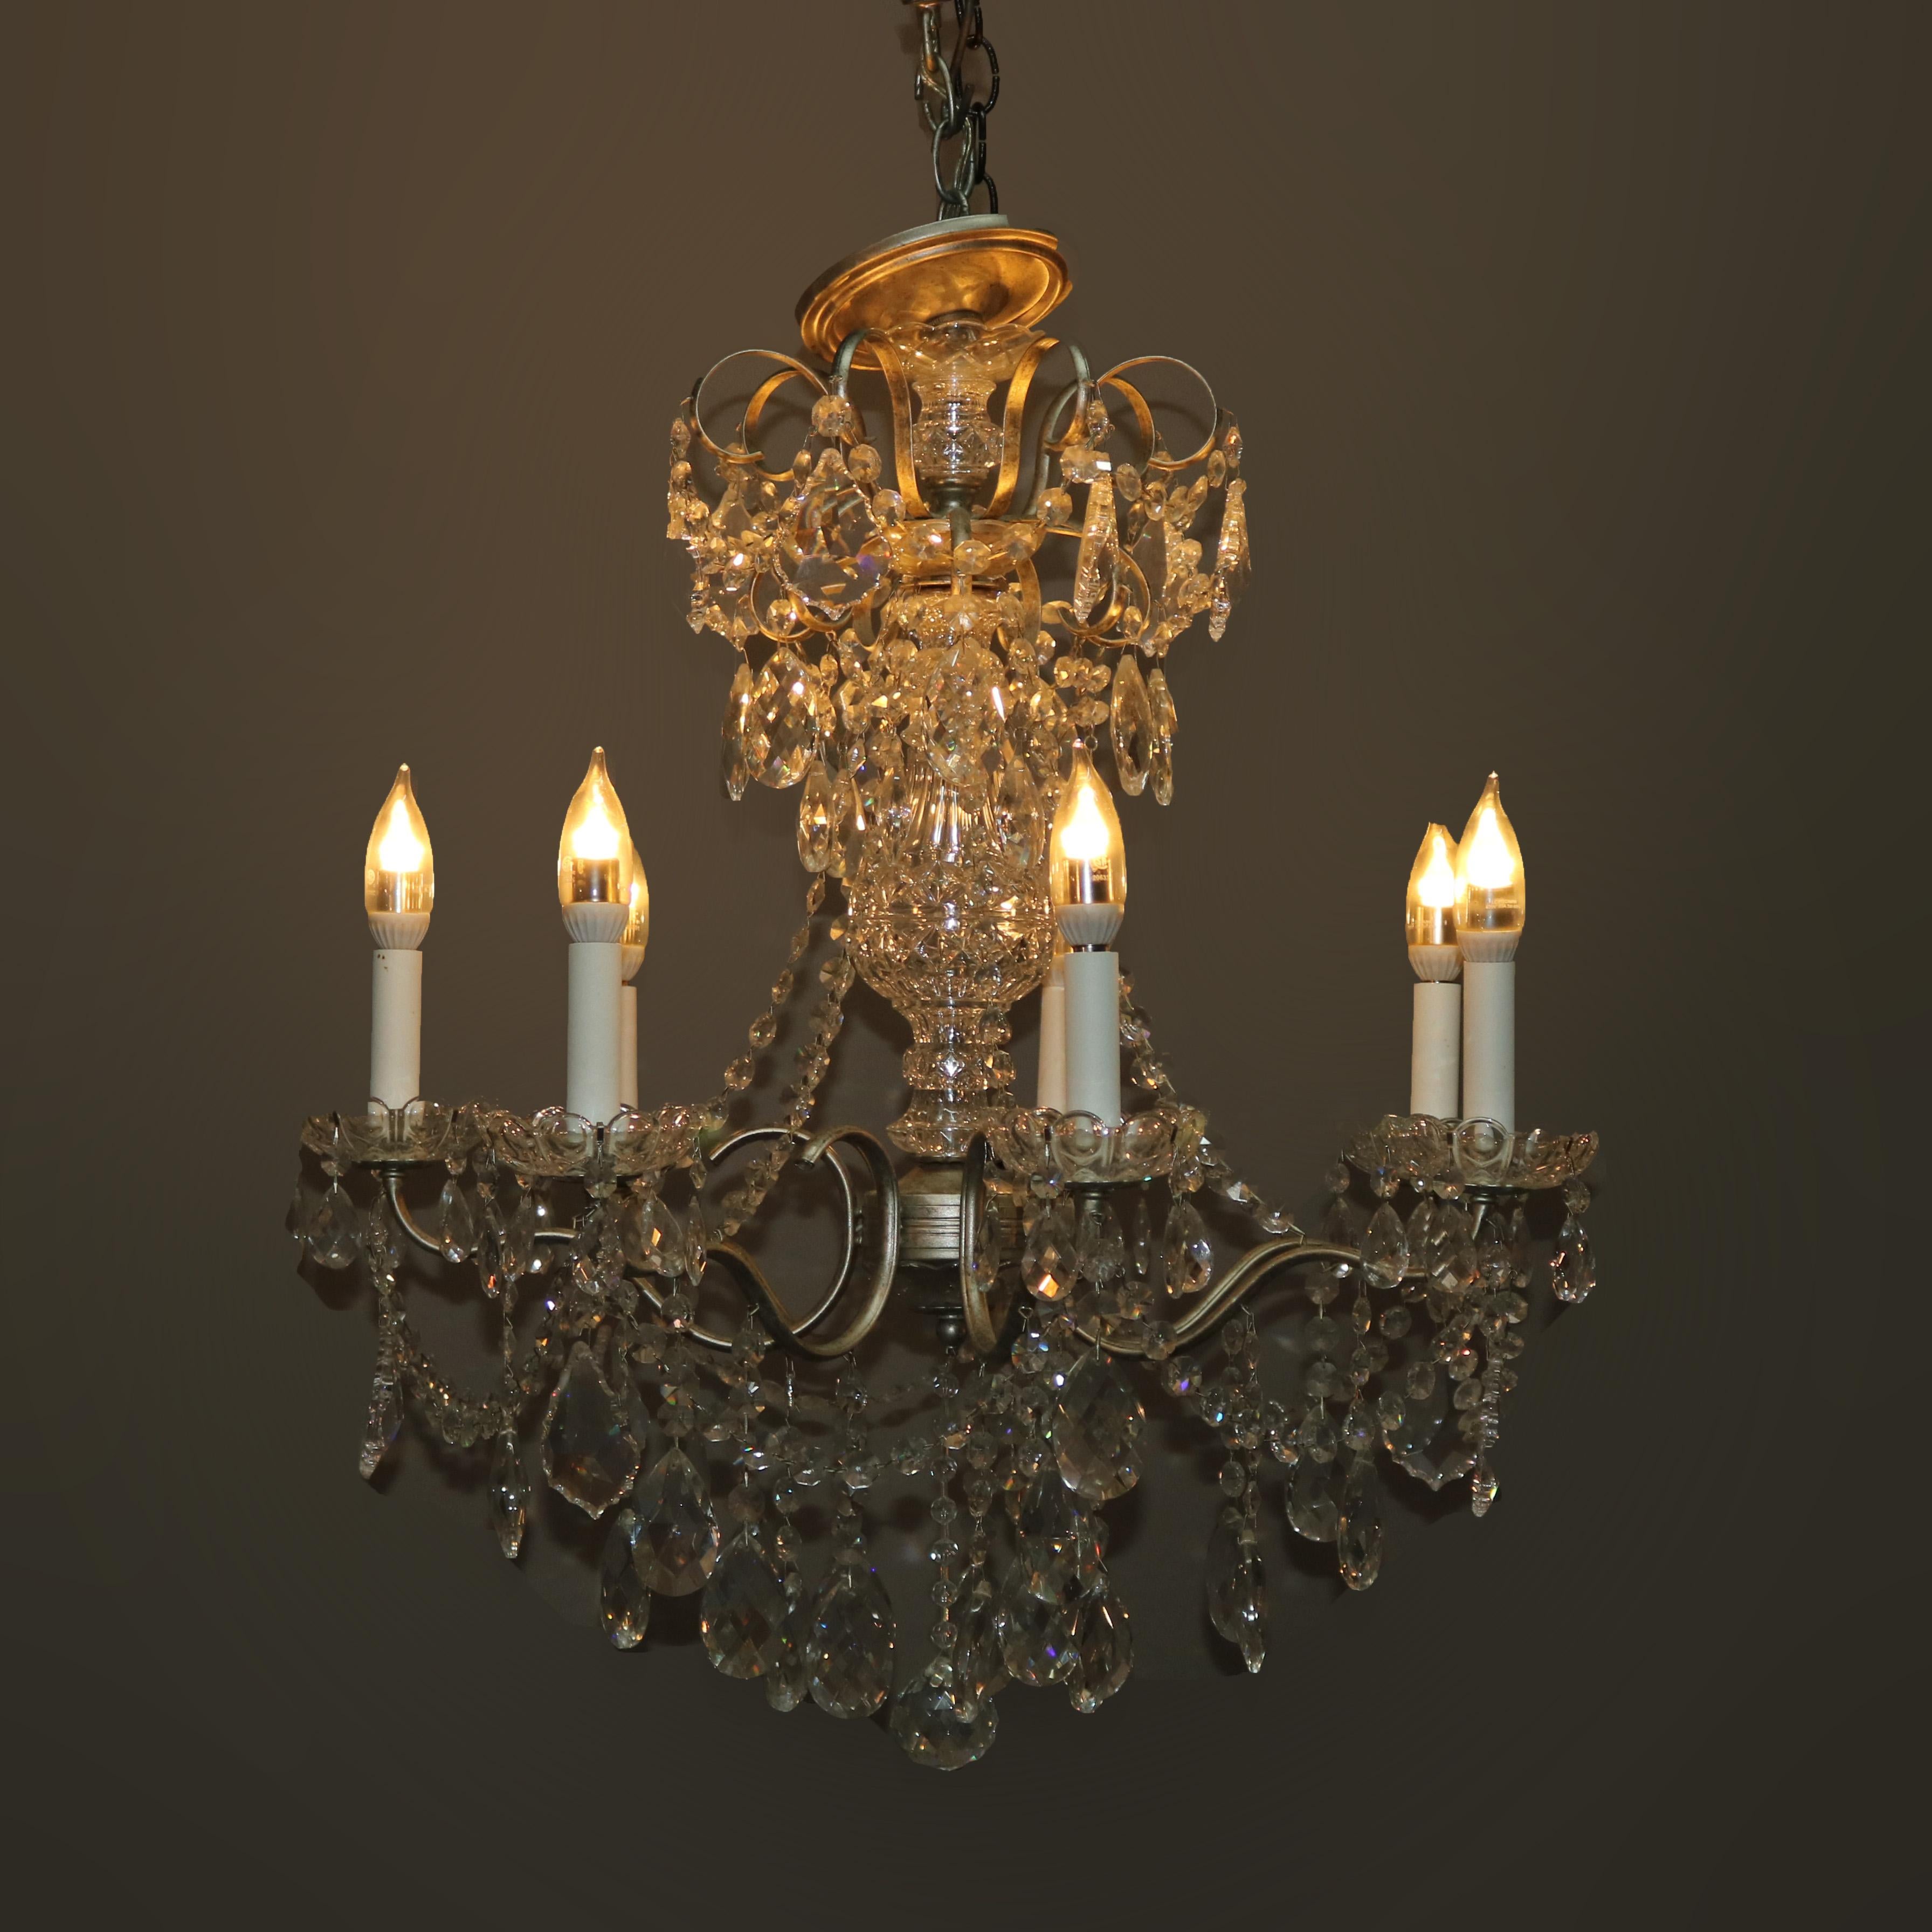 Cast Vintage French Silver Gilt and Cut Crystal Chandelier, 20th Century